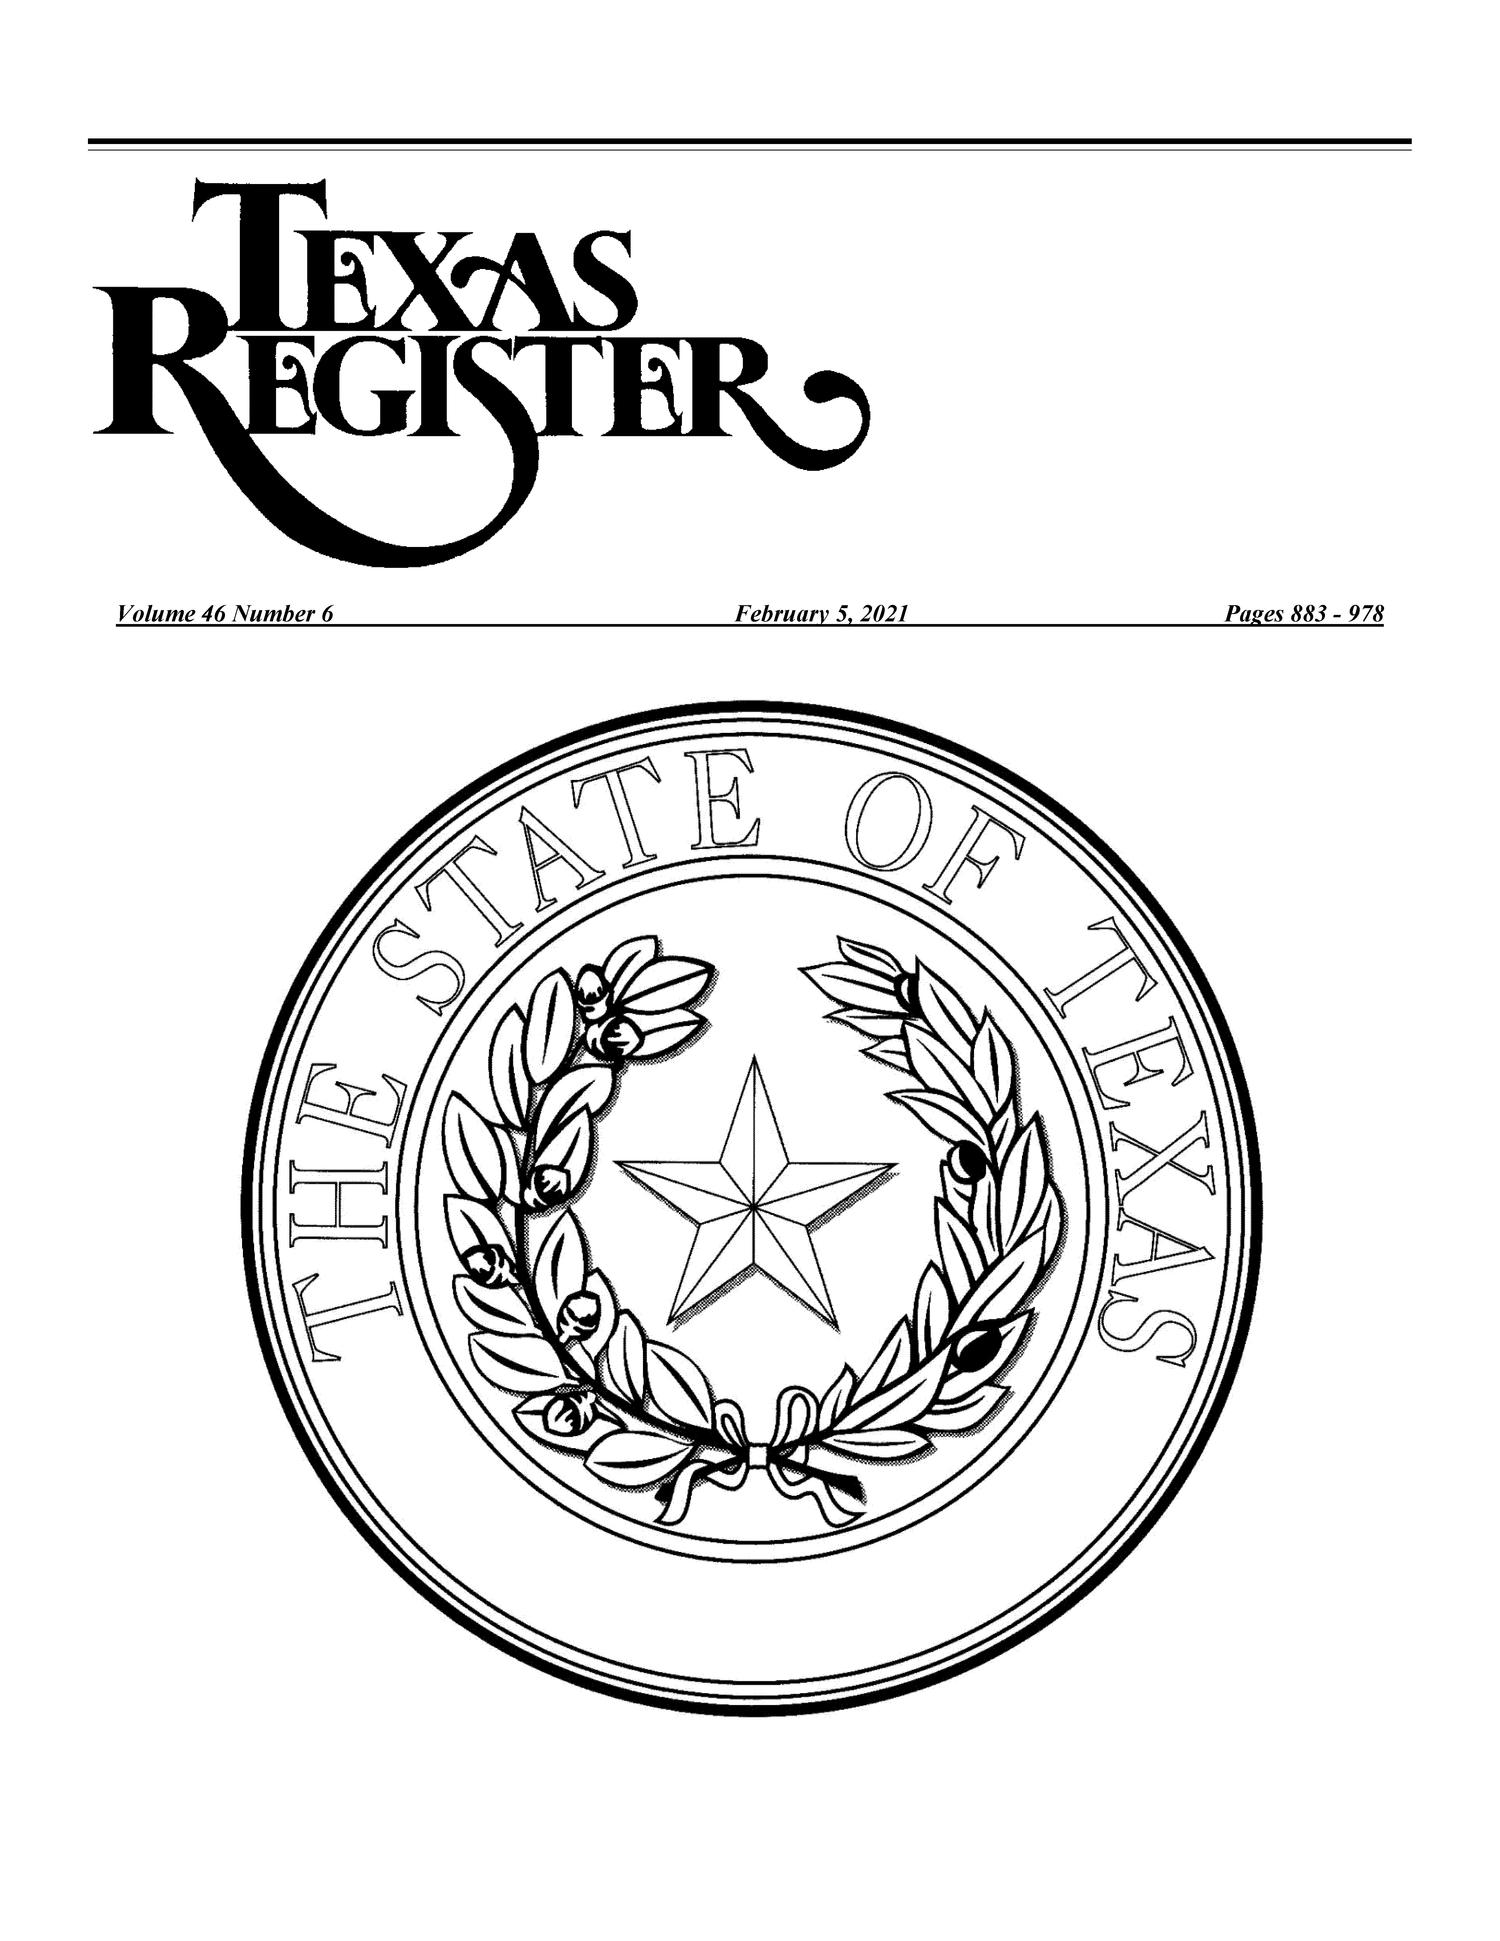 Texas Register, Volume 46, Number 6, Pages 883-978, February 5, 2021
                                                
                                                    Title Page
                                                